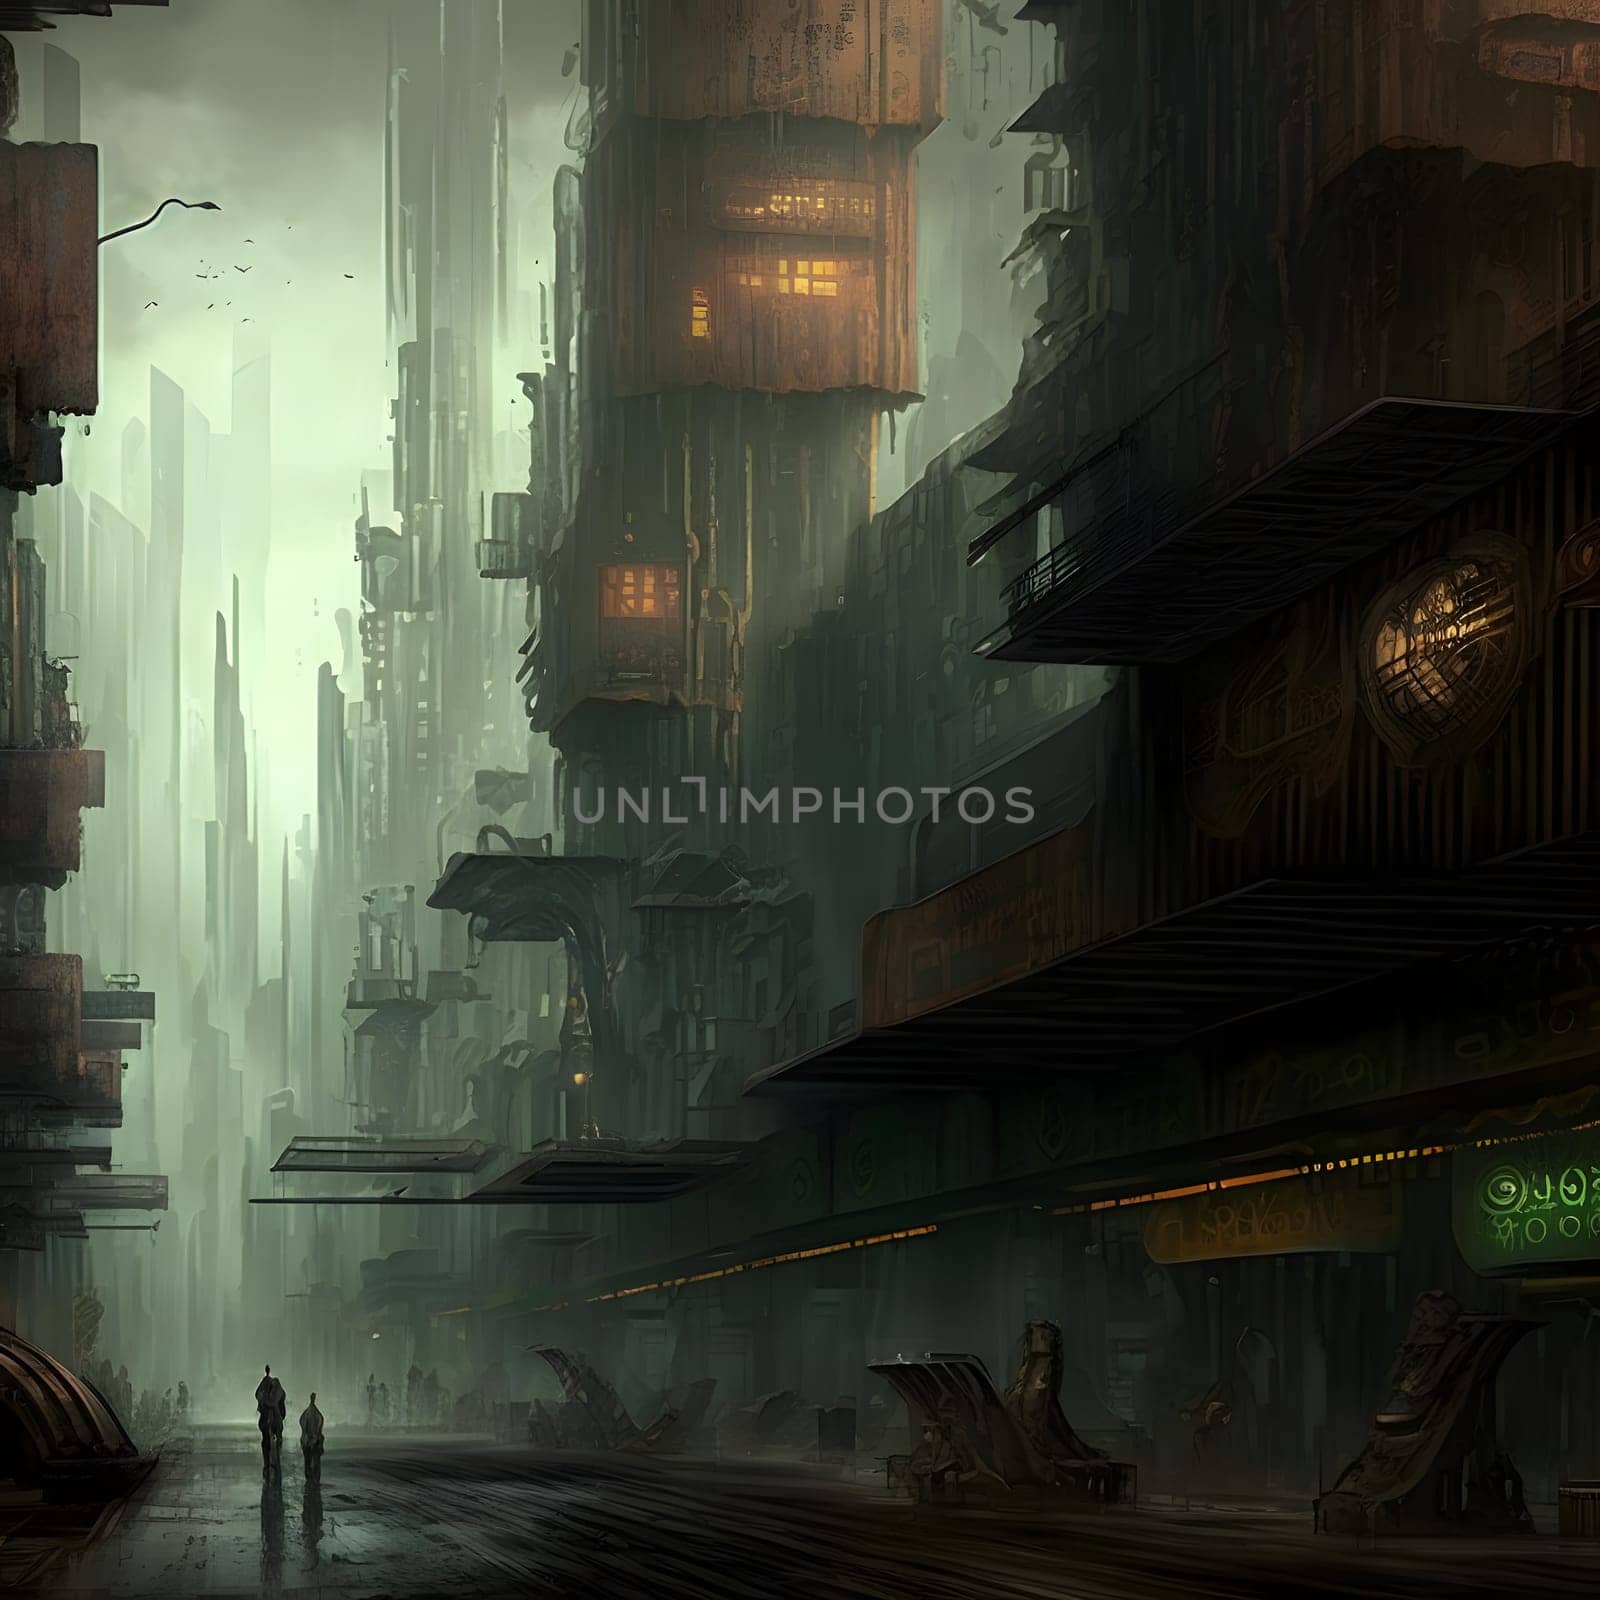 grim dystopian futuristic city at foggy night, neural network generated art. Digitally generated image. Not based on any actual person, scene or pattern.